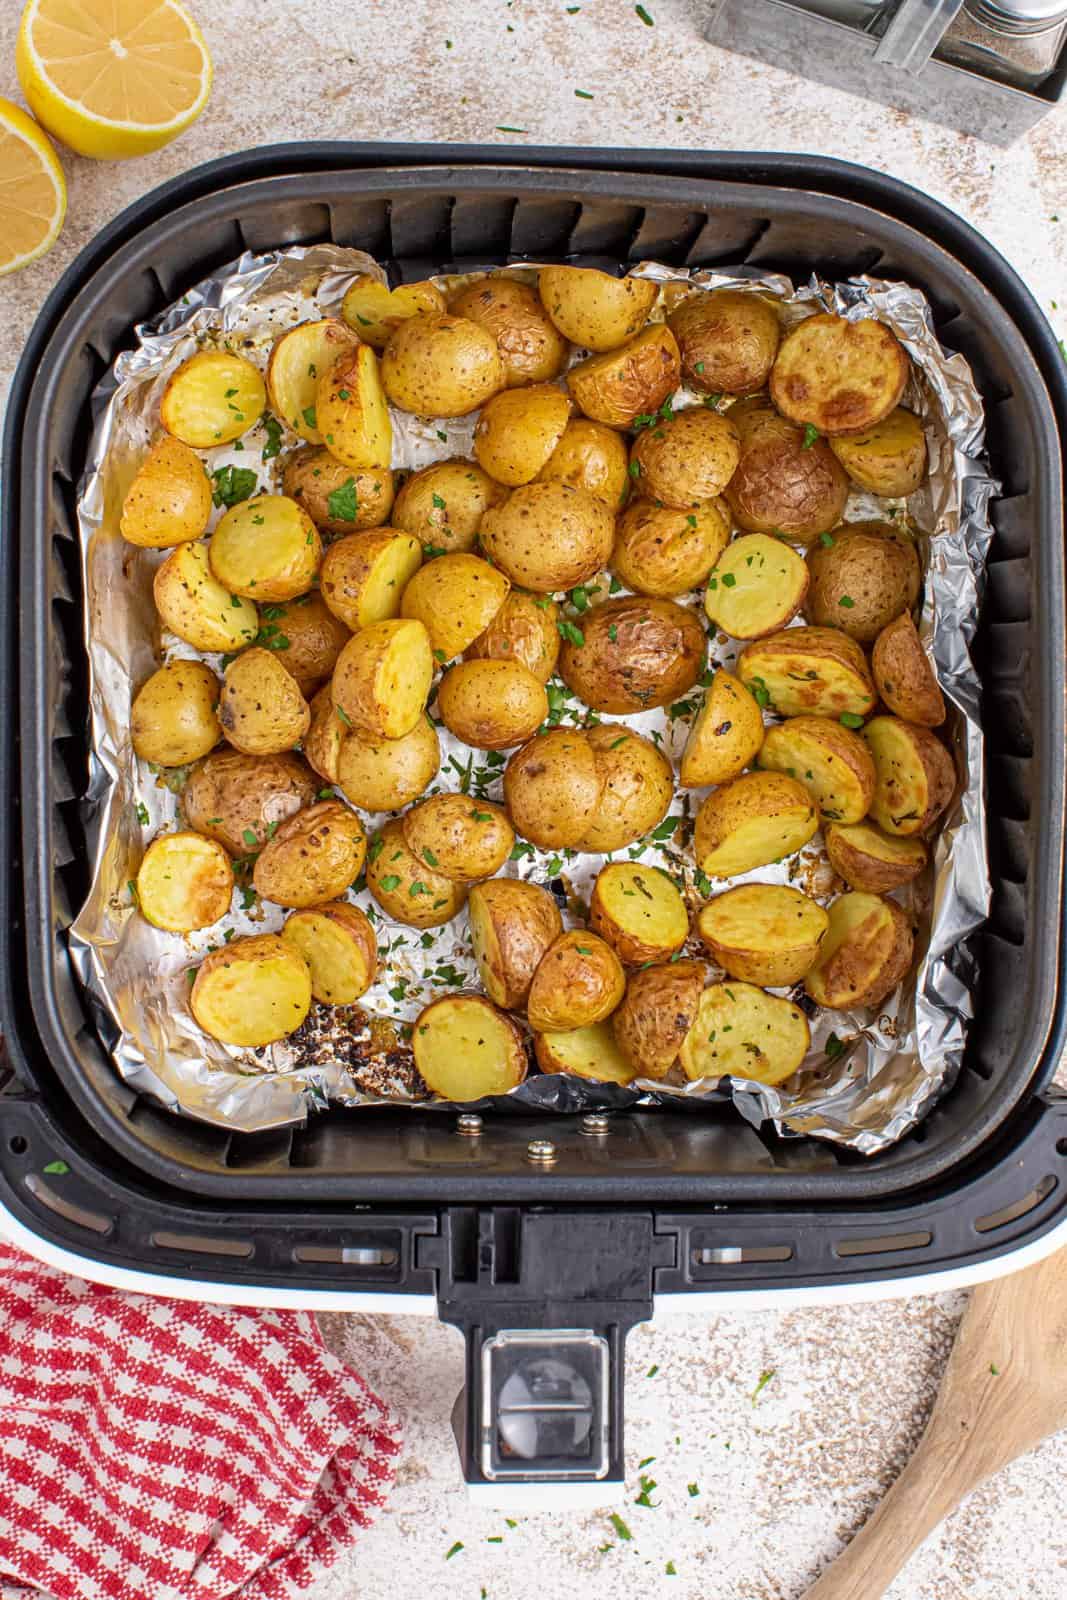 Roasted Air Fryer potatoes in a basket.